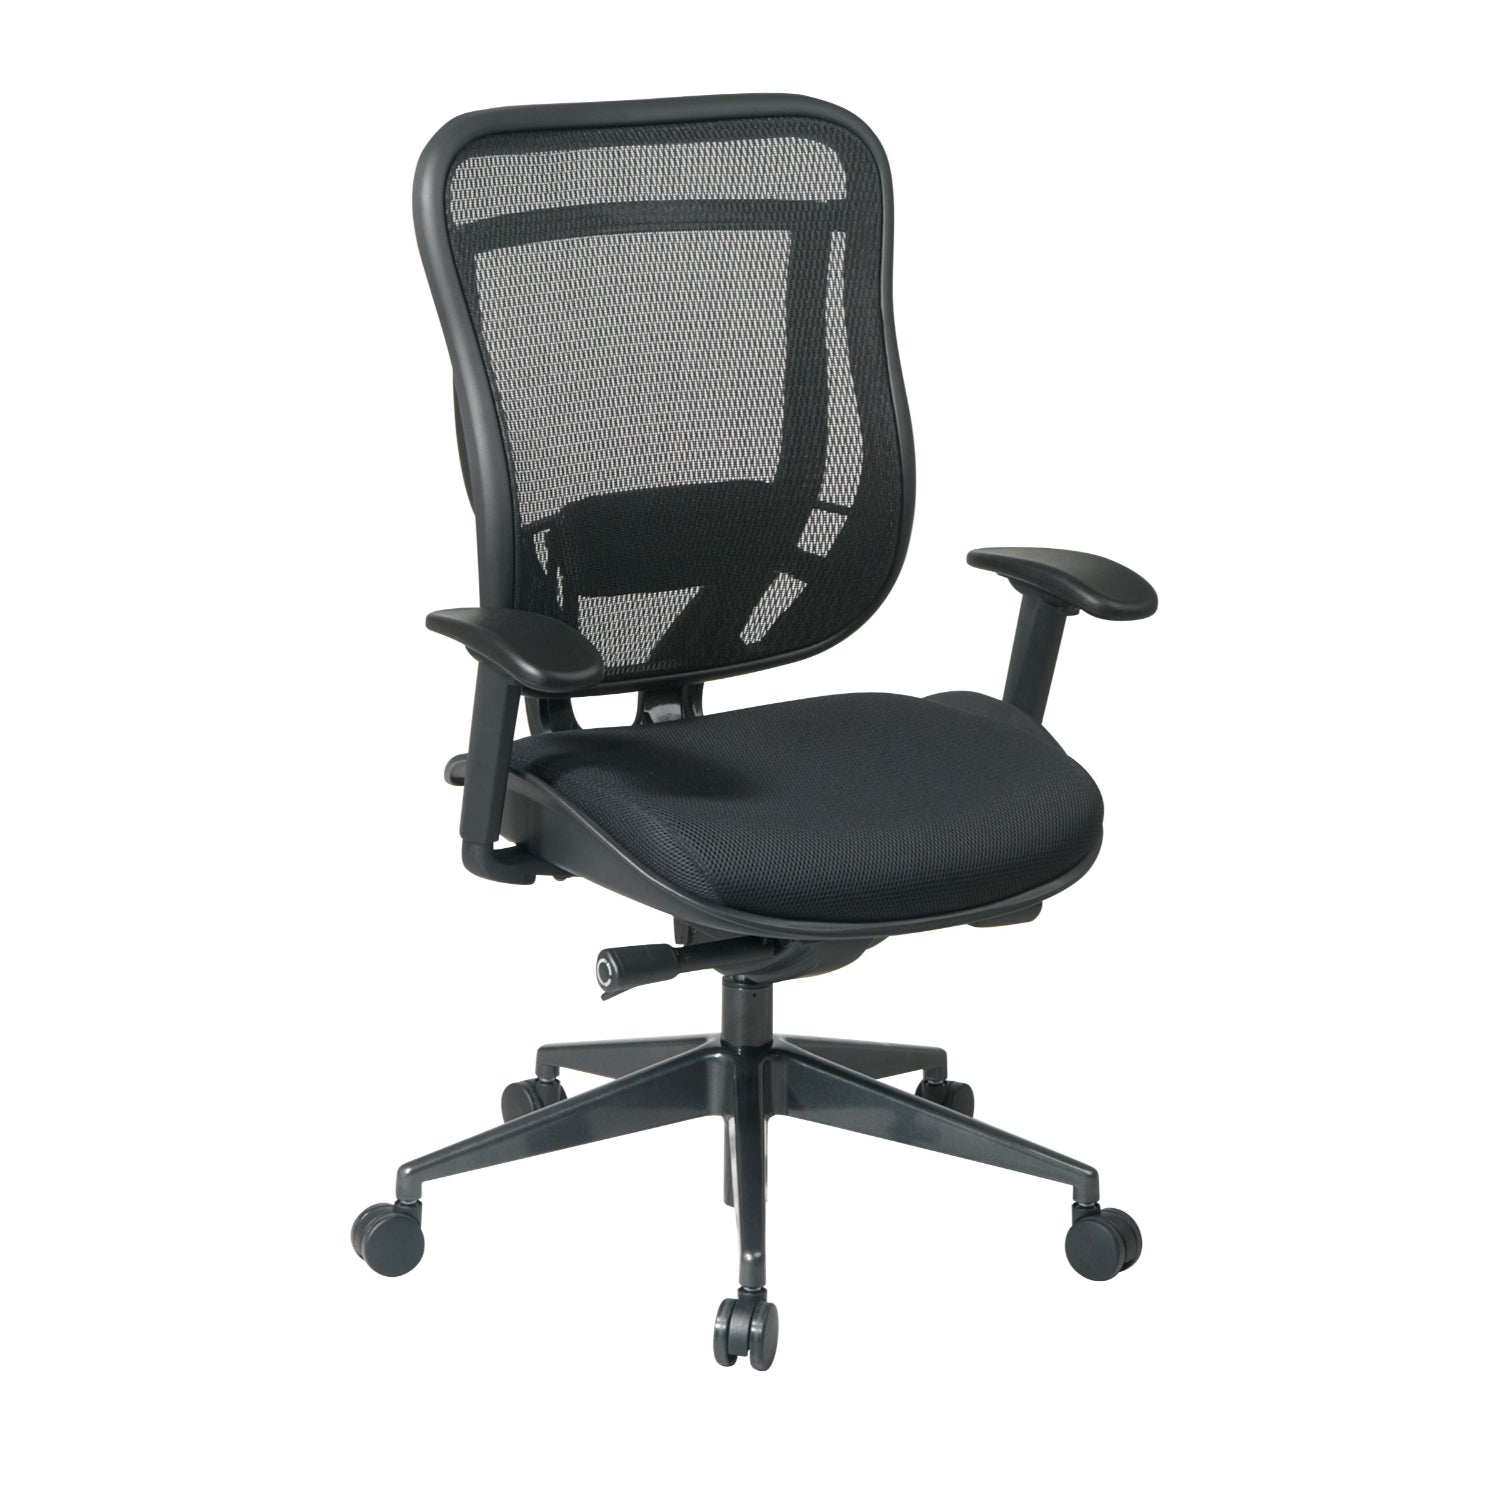 Breathable Mesh Back and Black Mesh Seat Executive High Back Chair with Adjustable Arms and Lumbar, Seat Slider and Industrial Steel Finish Angled Base, 300 Lbs Weight Capacity